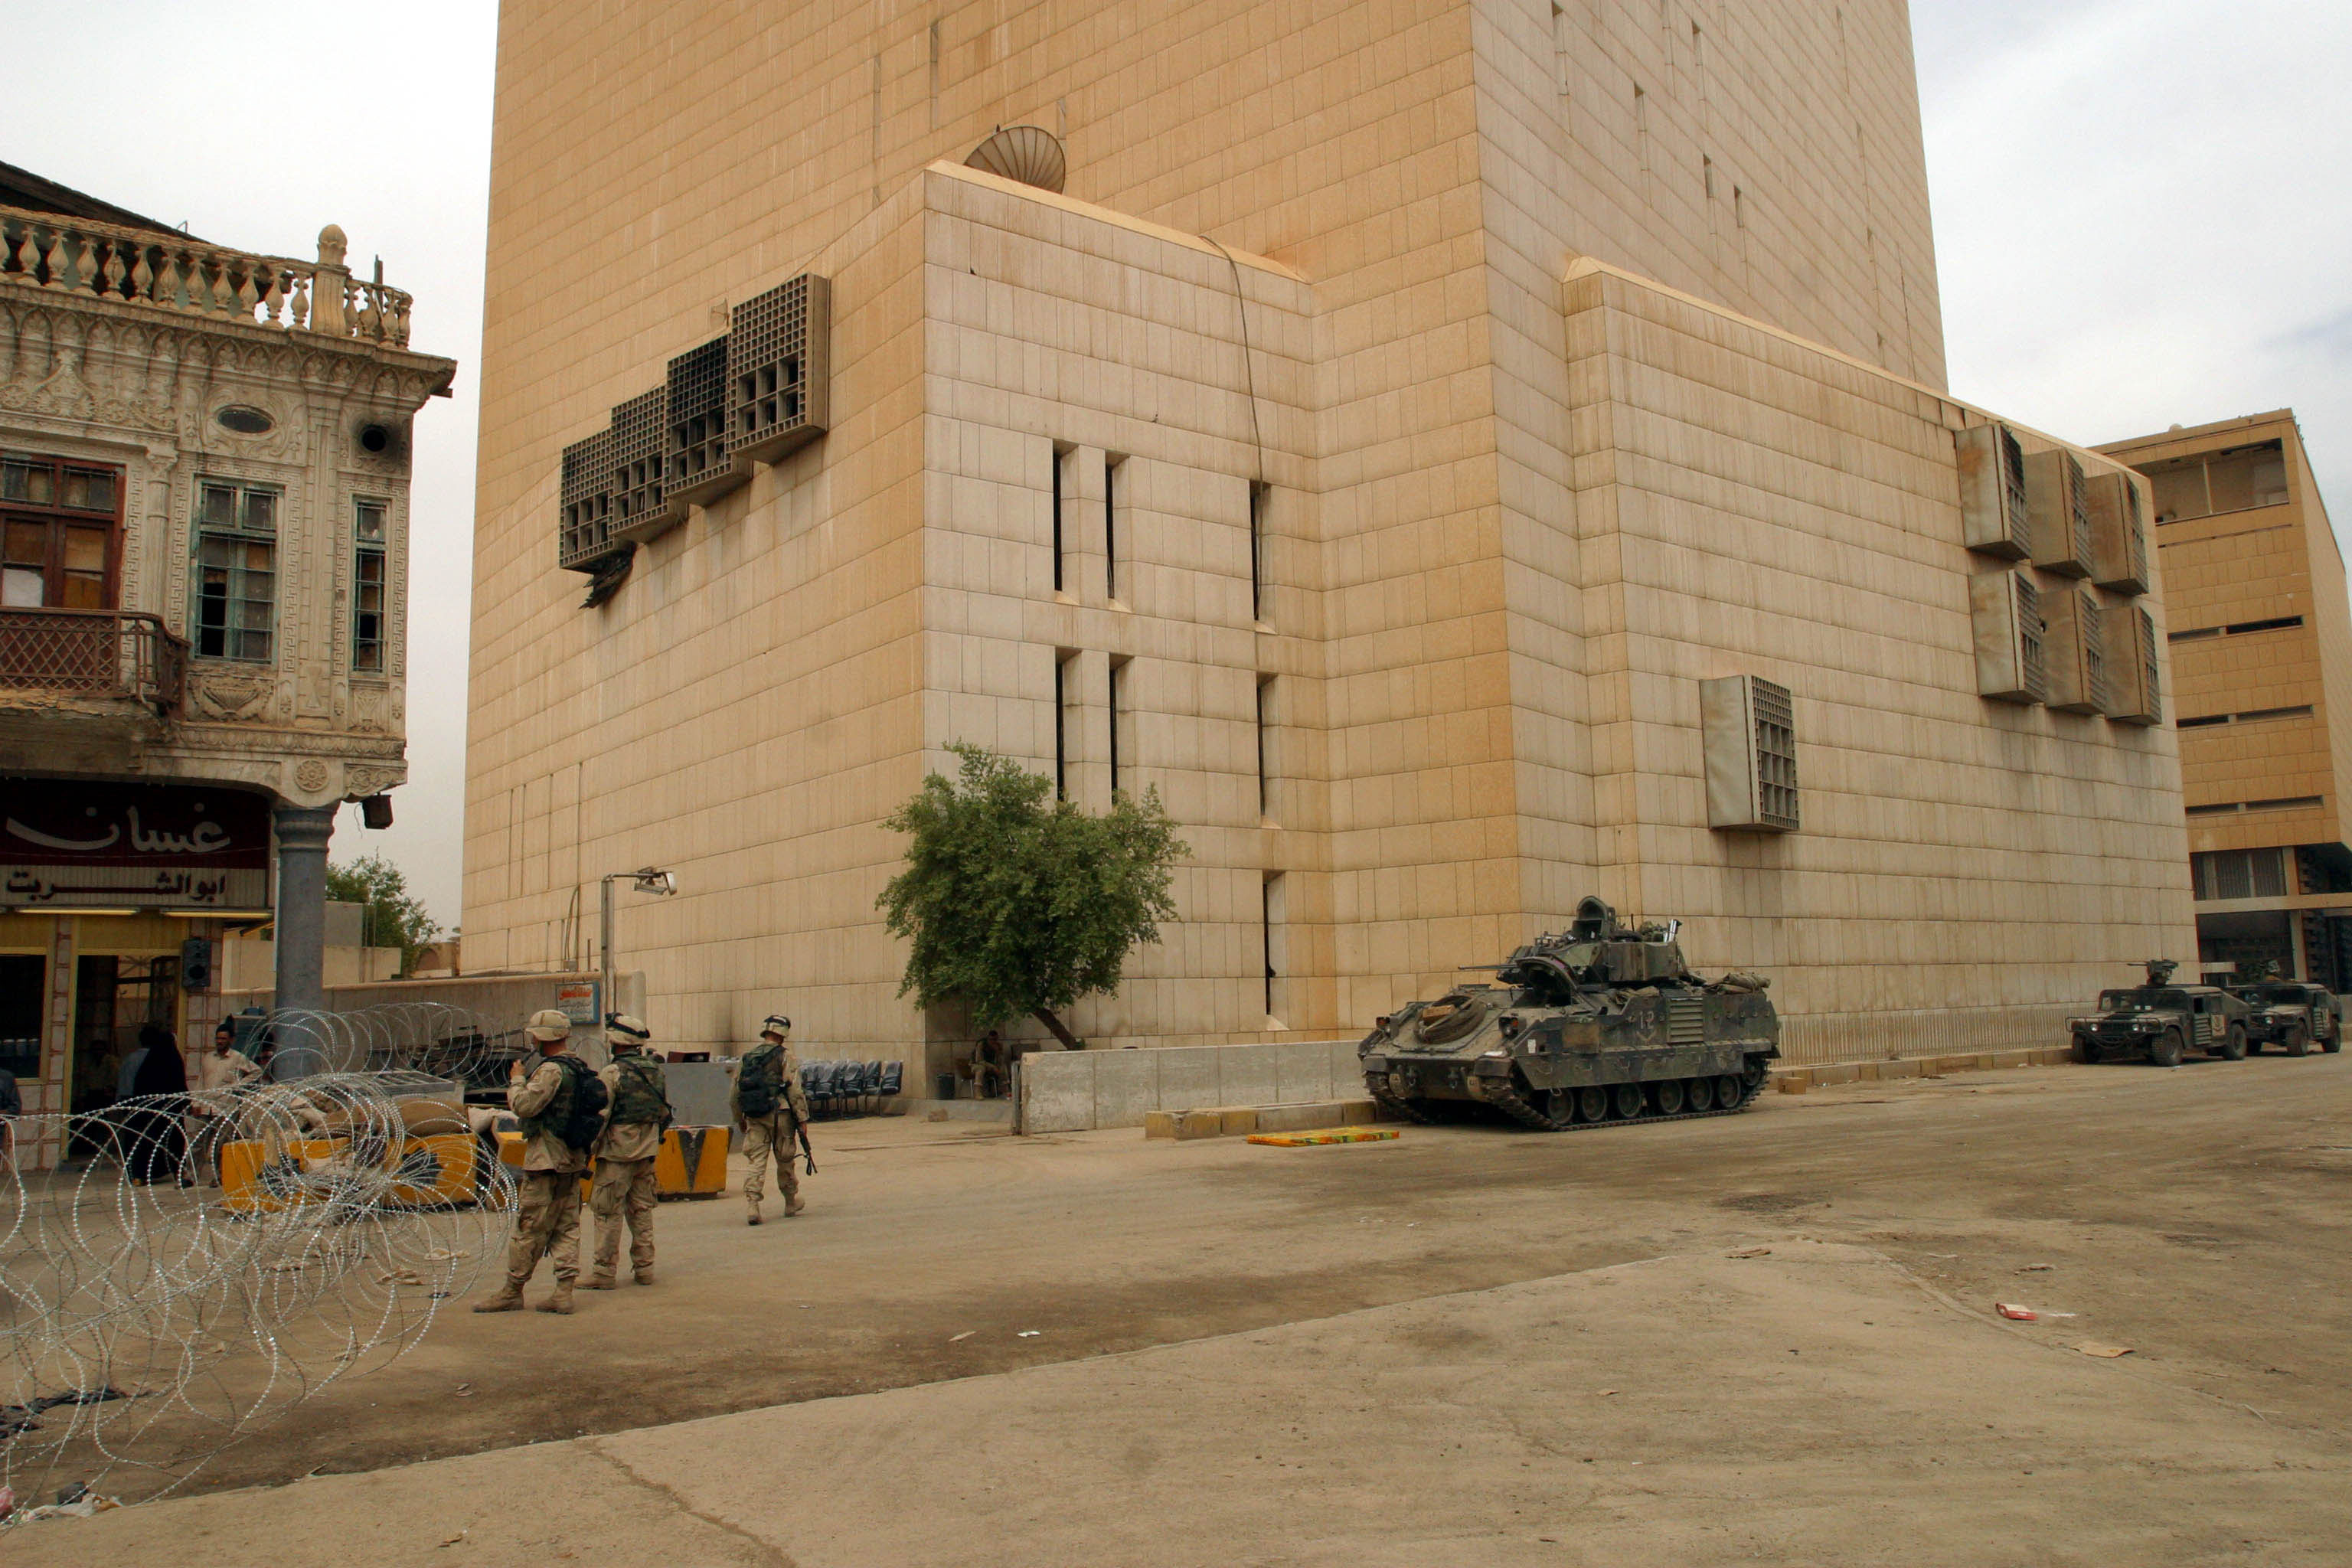 US troops guard the Central Bank of Iraq. The building was looted during the war. USAIDS is providing a "ministry in a box" which includes desks, chairs, telephones and computers to help get the misintry get back to business.